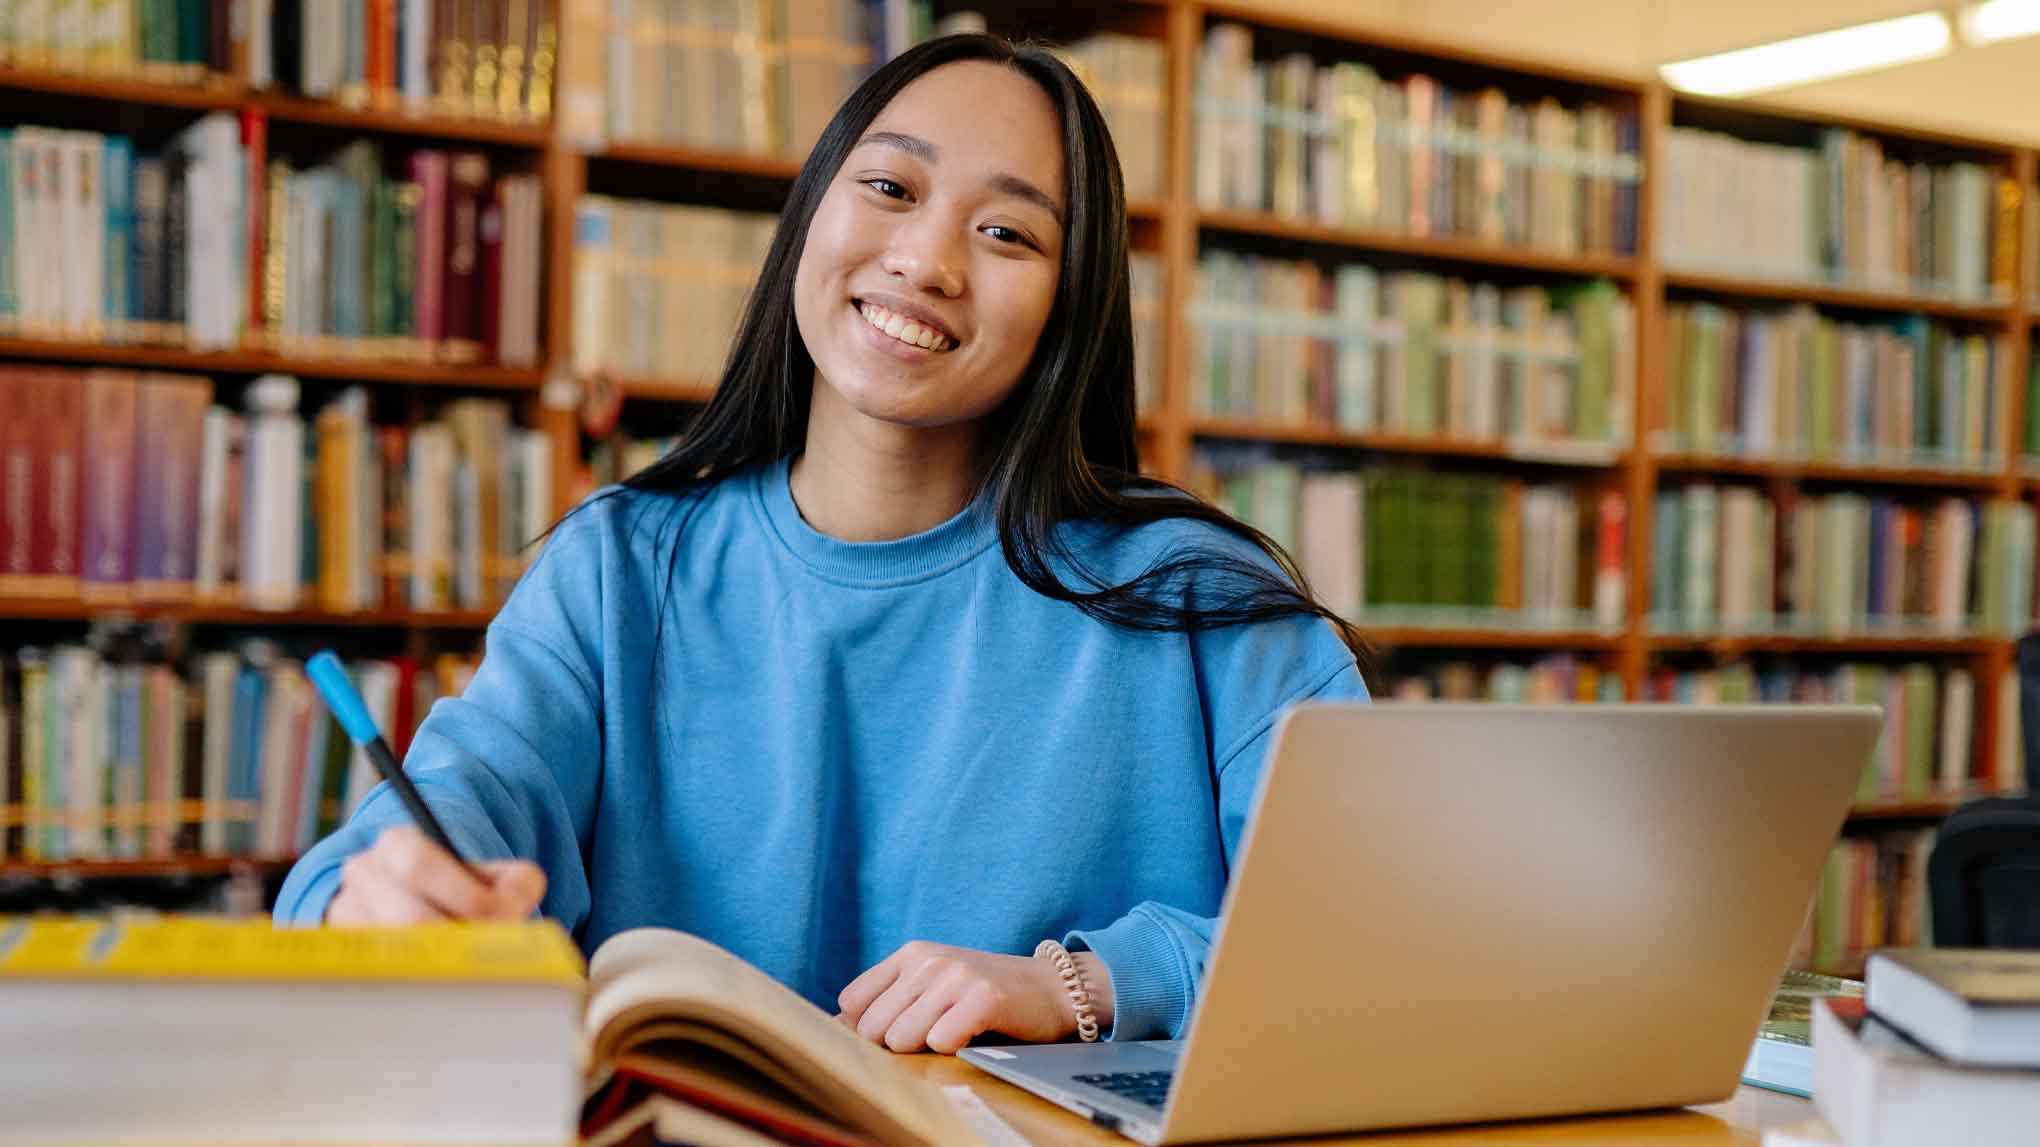 girl in blue sweatshirt smiling while studying at the library 